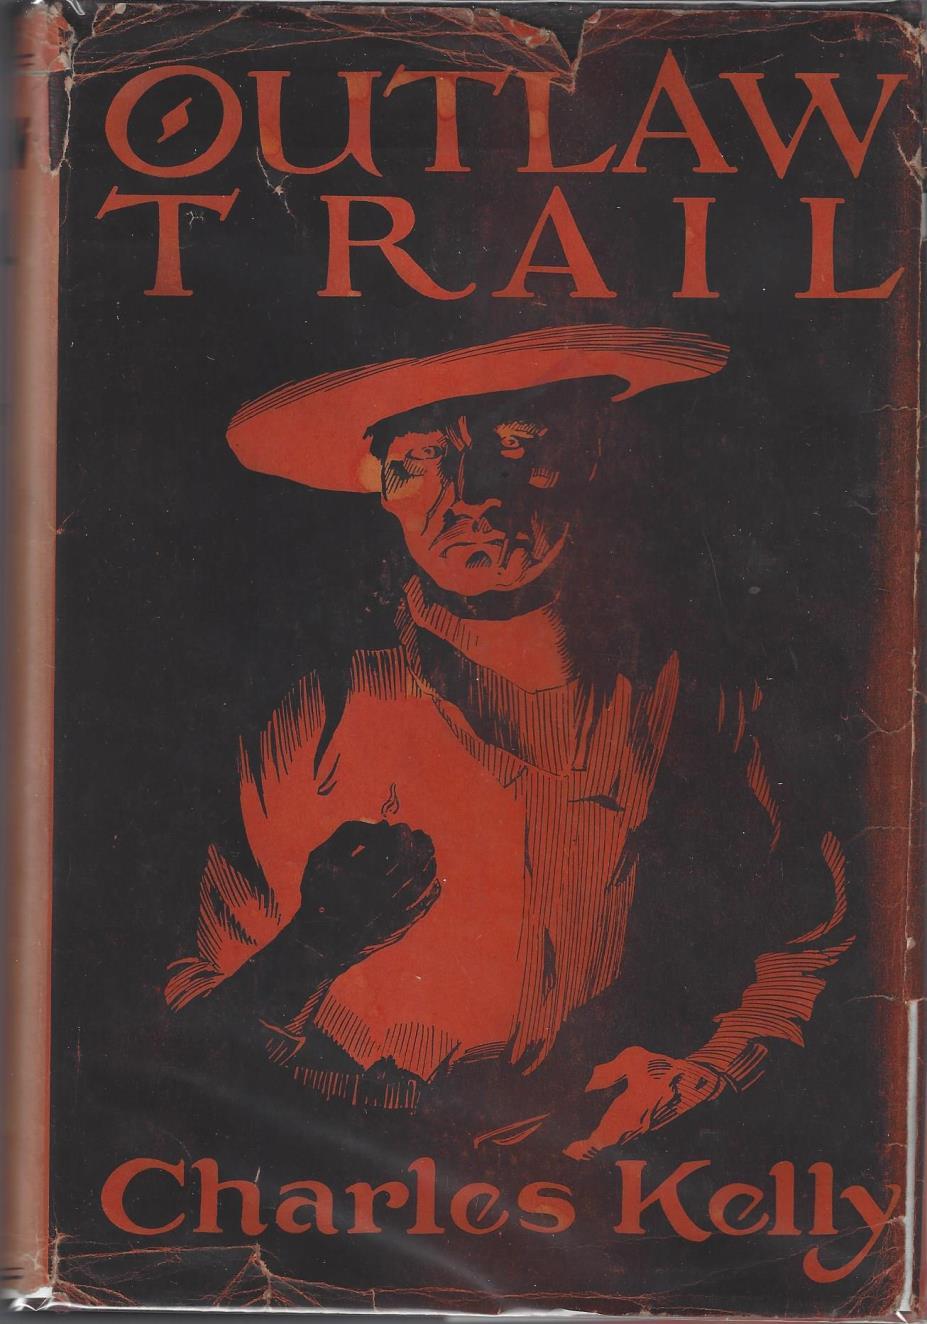 Landmark Work on Butch Cassidy 6- Kelly, Charles. The Outlaw Trail: A History of Butch Cassidy and His Wild Bunch. Salt Lake City: 1938. First Edition. 337pp.